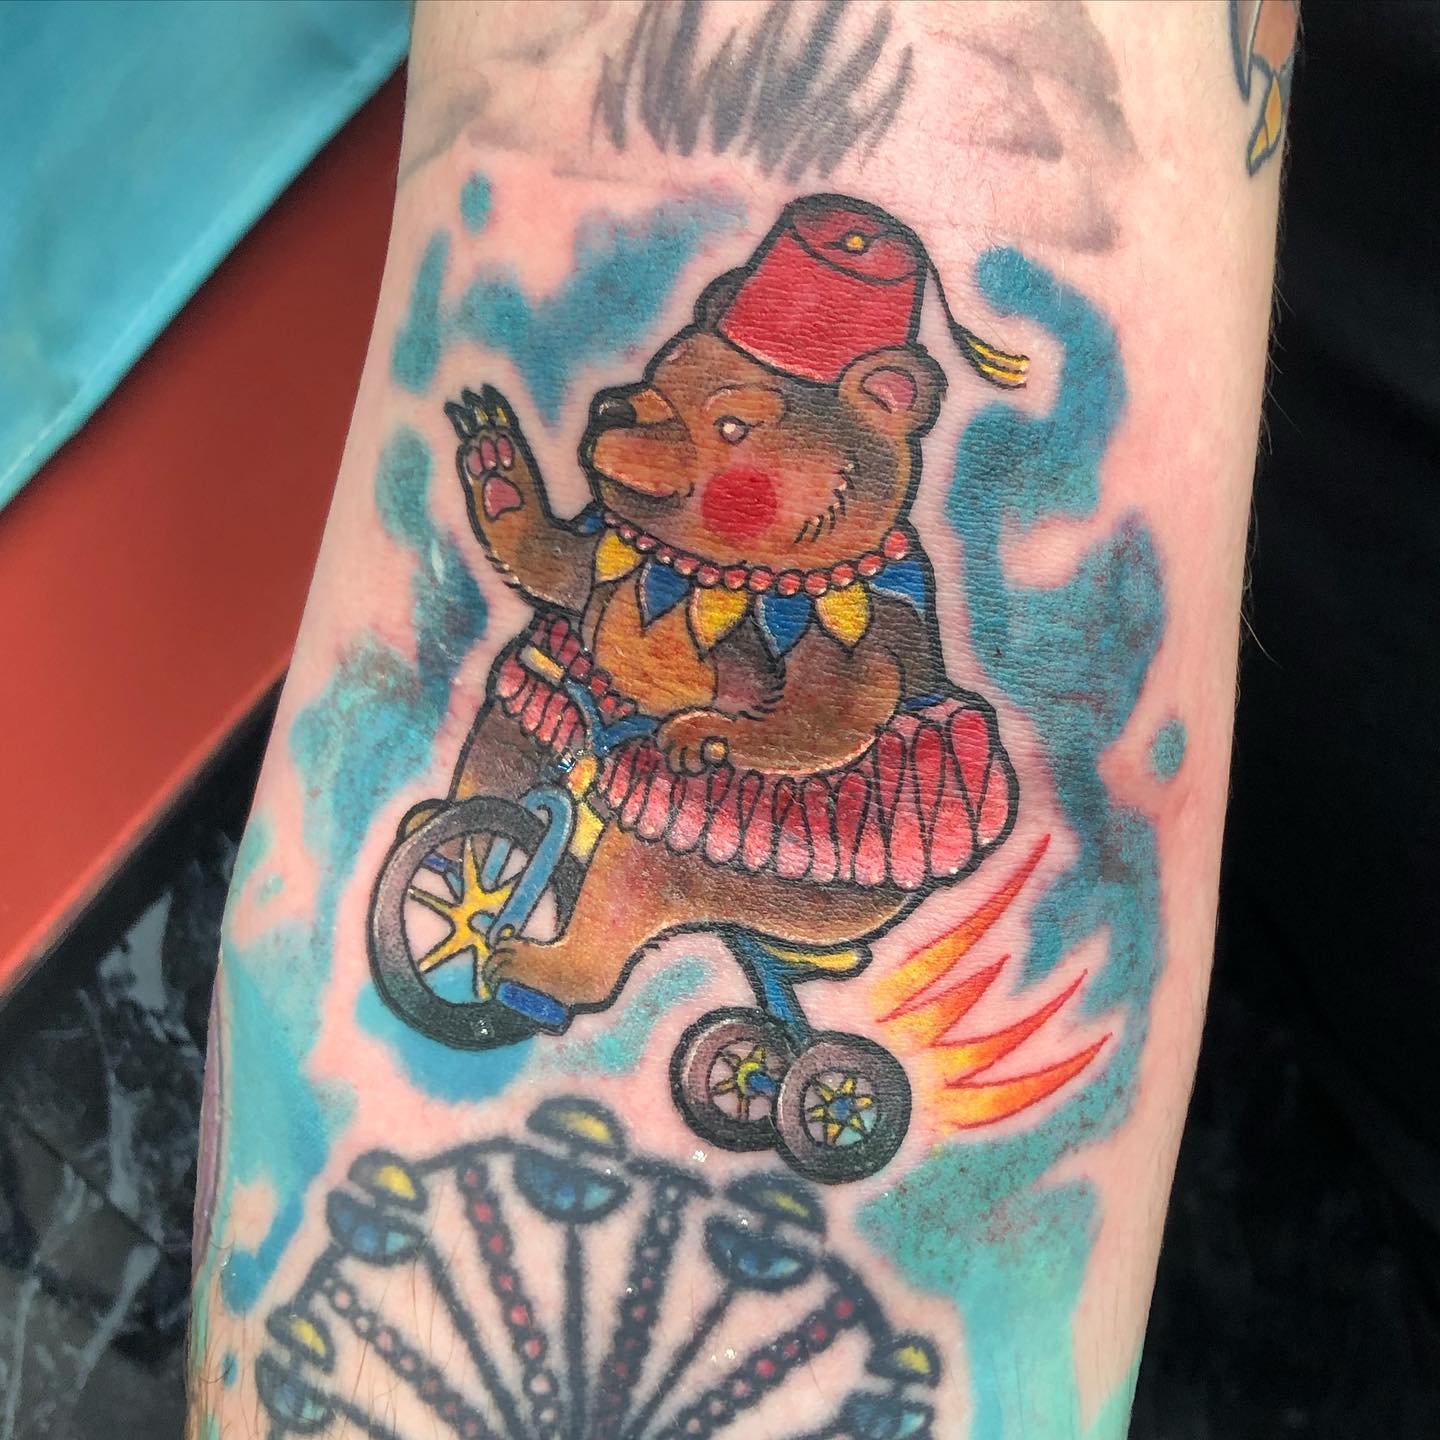 Circus Bear for Dean in the elbow ditch. Thank you so much for your excellent ideas. 

                   